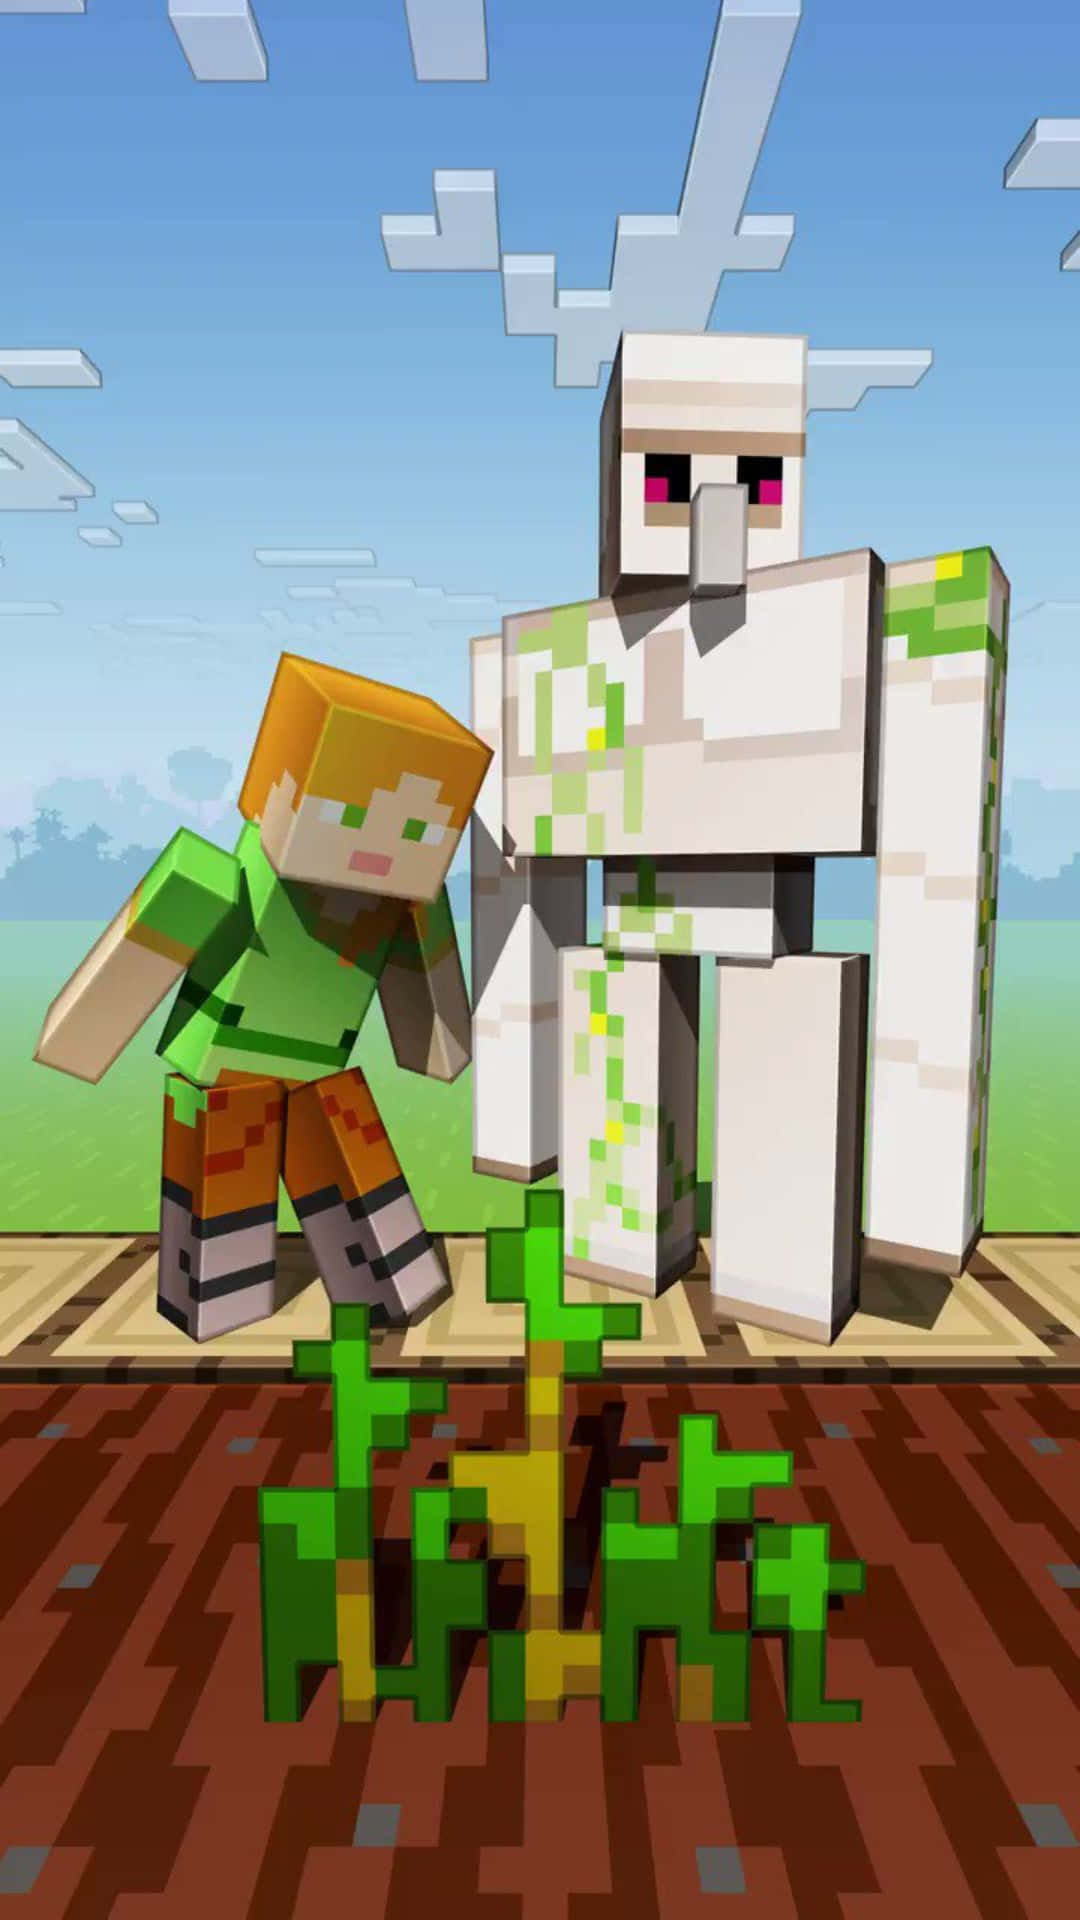 Mighty Iron Golem Standing Tall in the World of Minecraft Wallpaper